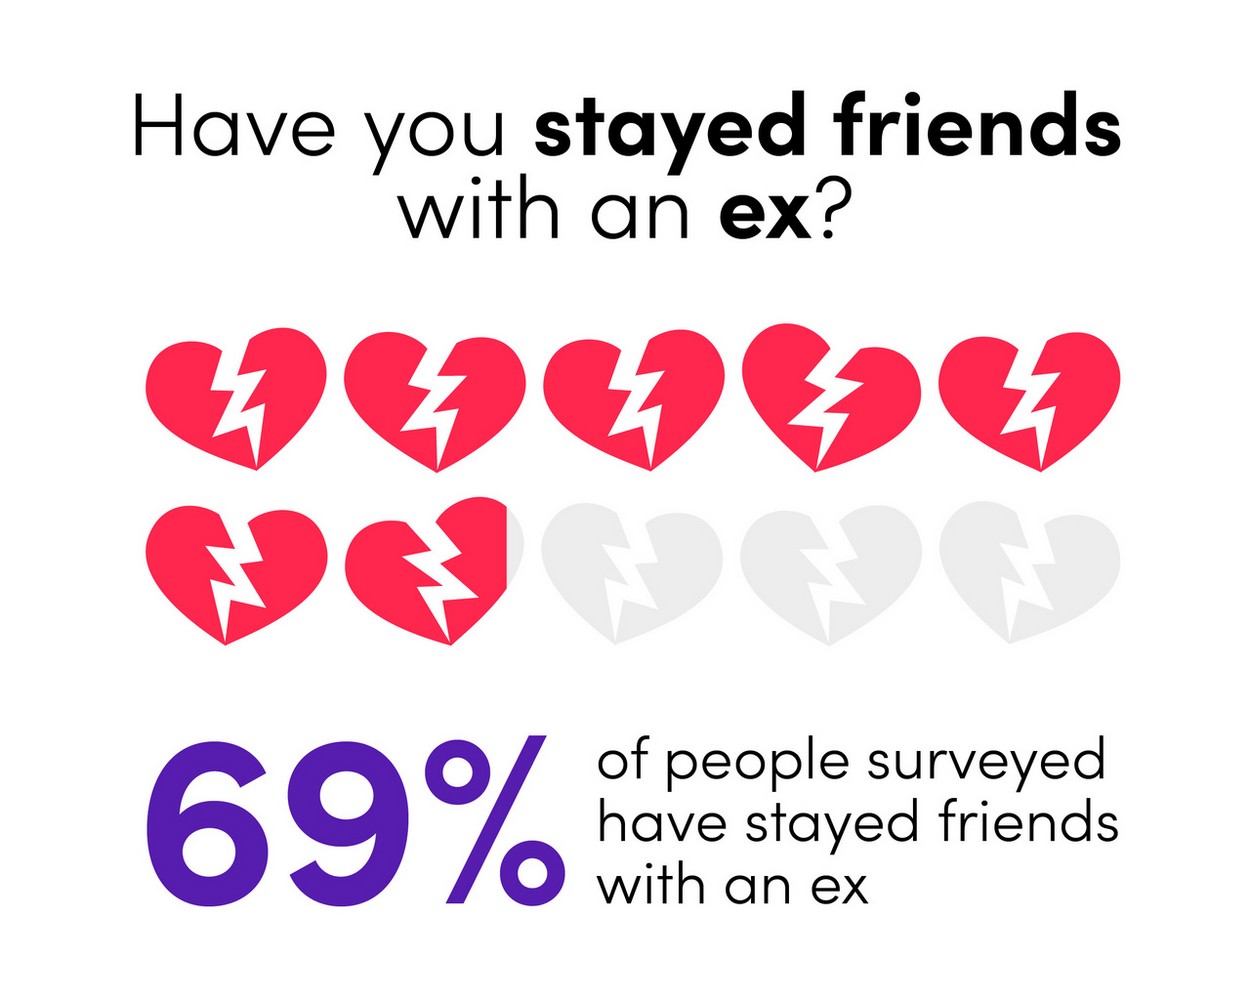 Have you stayed friends with an ex?